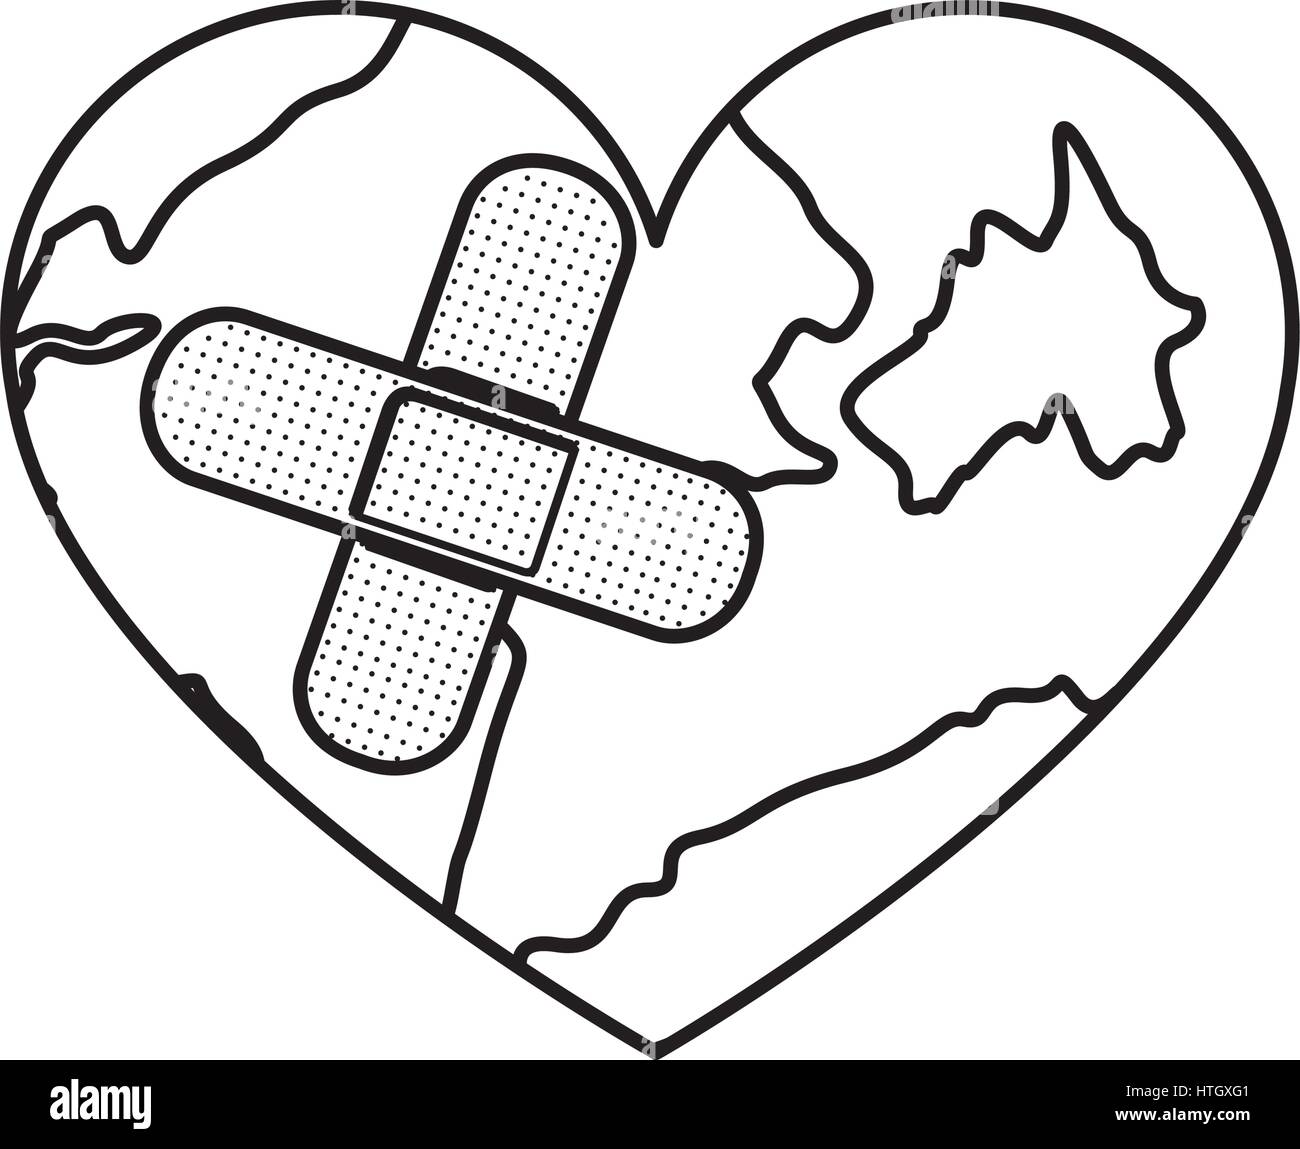 figure earth planet heart with band aid icon Stock Vector